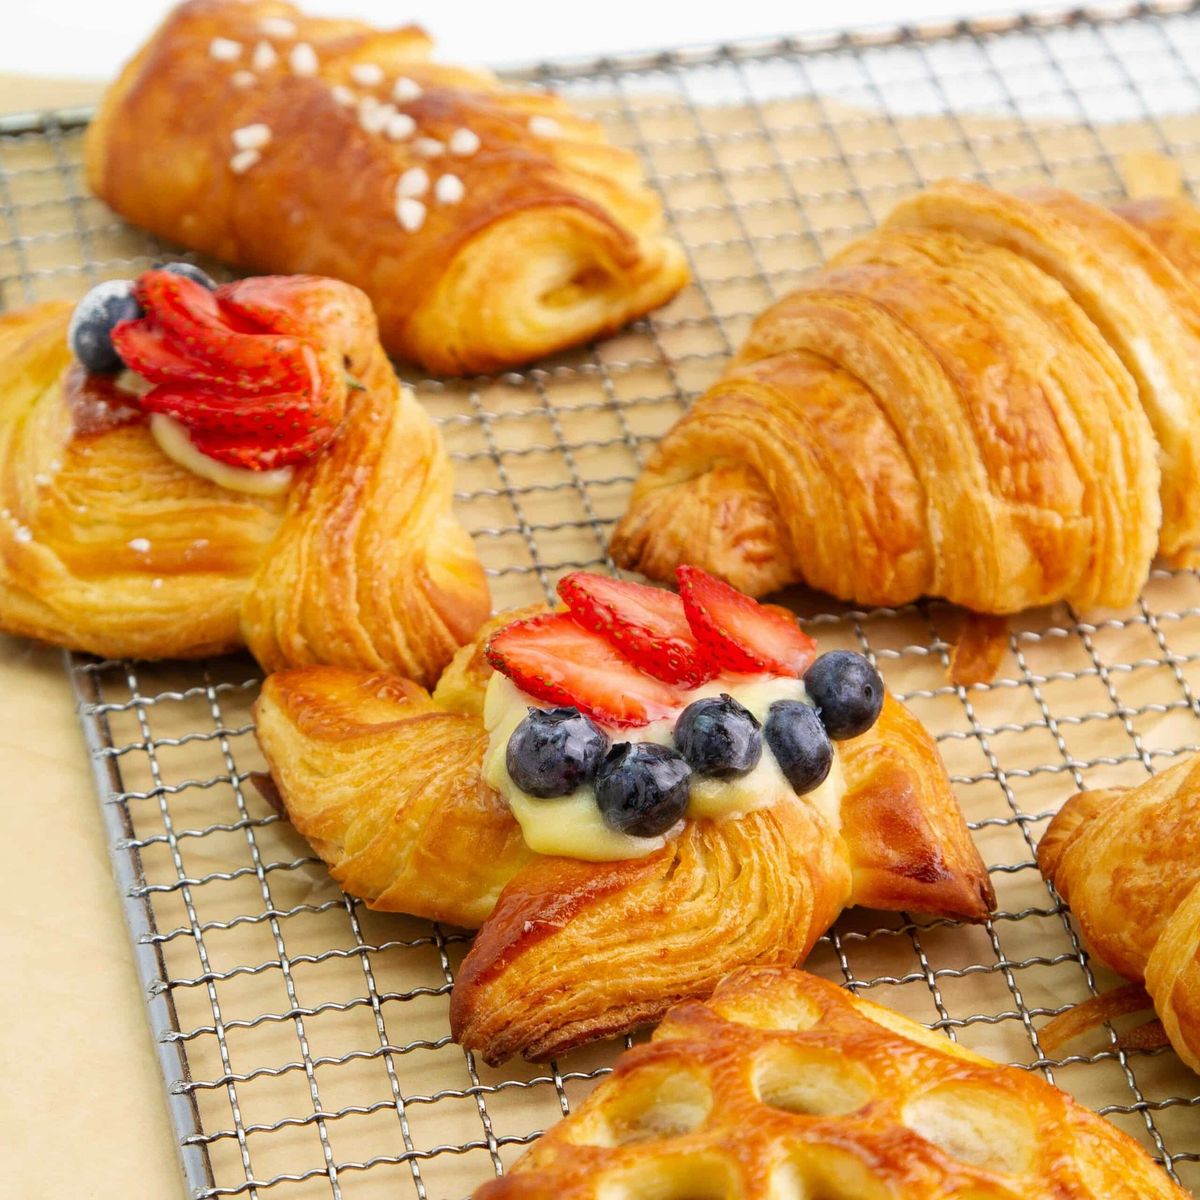 French Croissants, Danish Pastries, & Mimosas